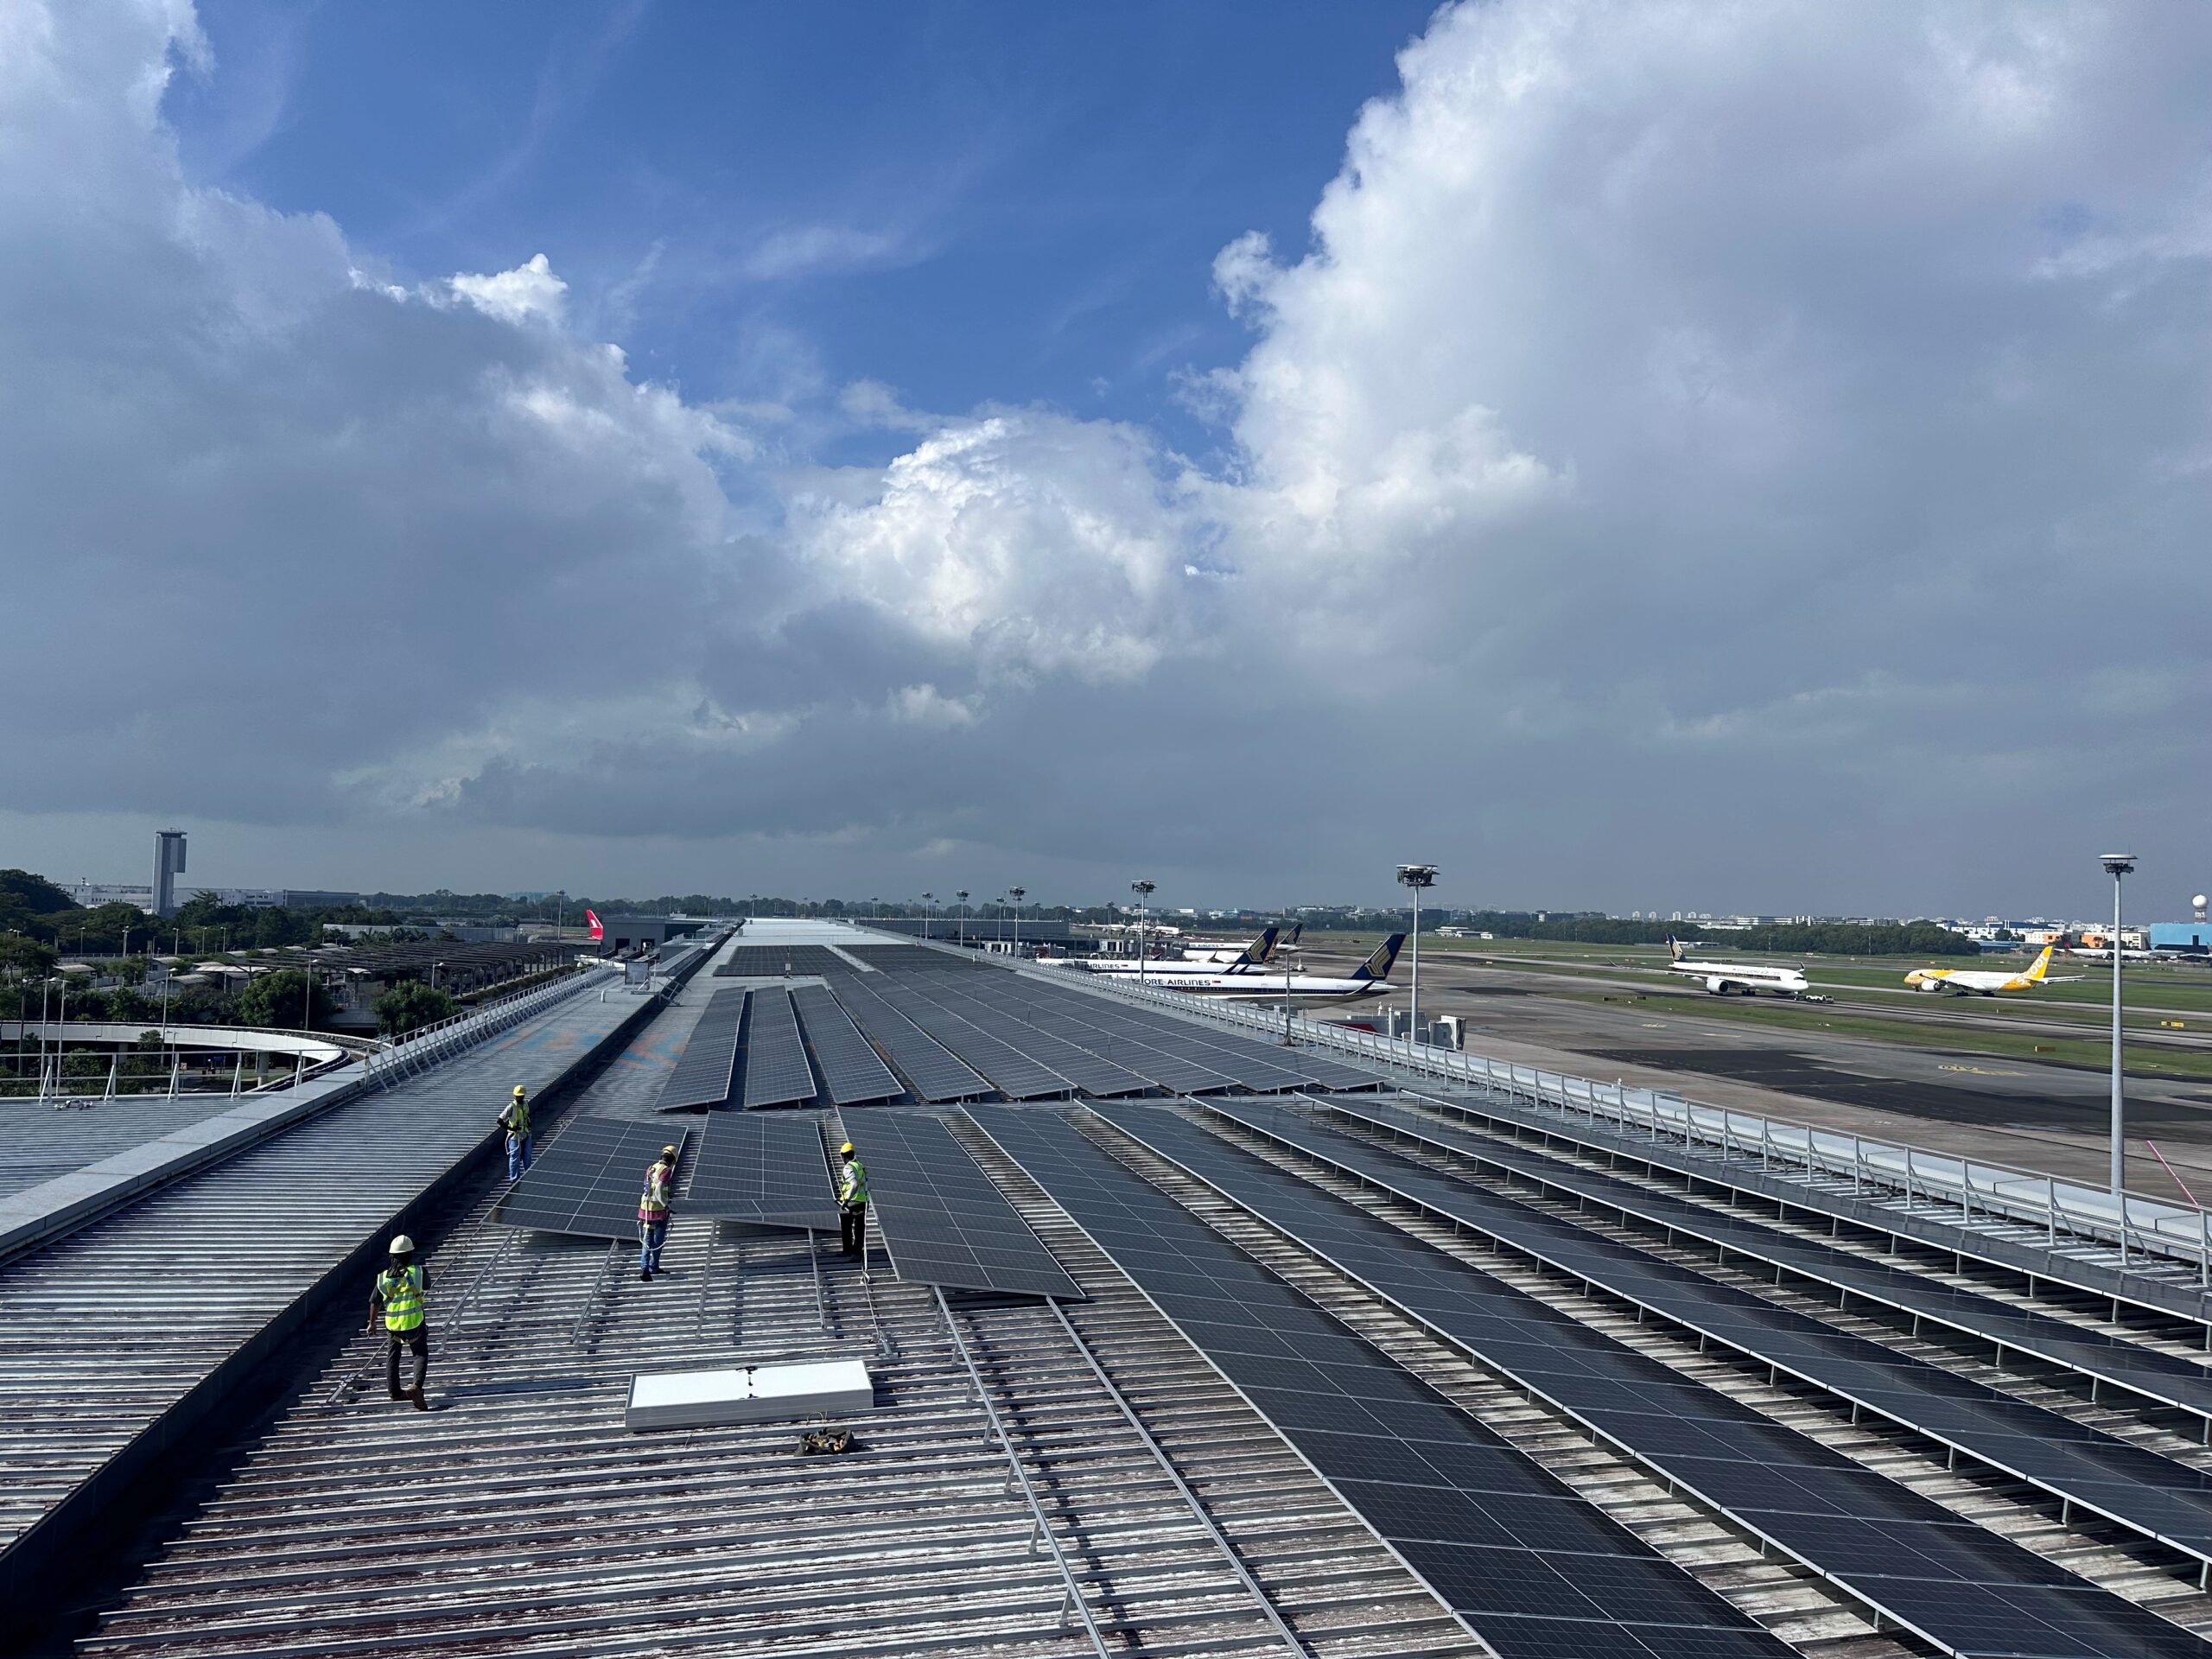 Workers installing solar panels on the Terminal 3 rooftop